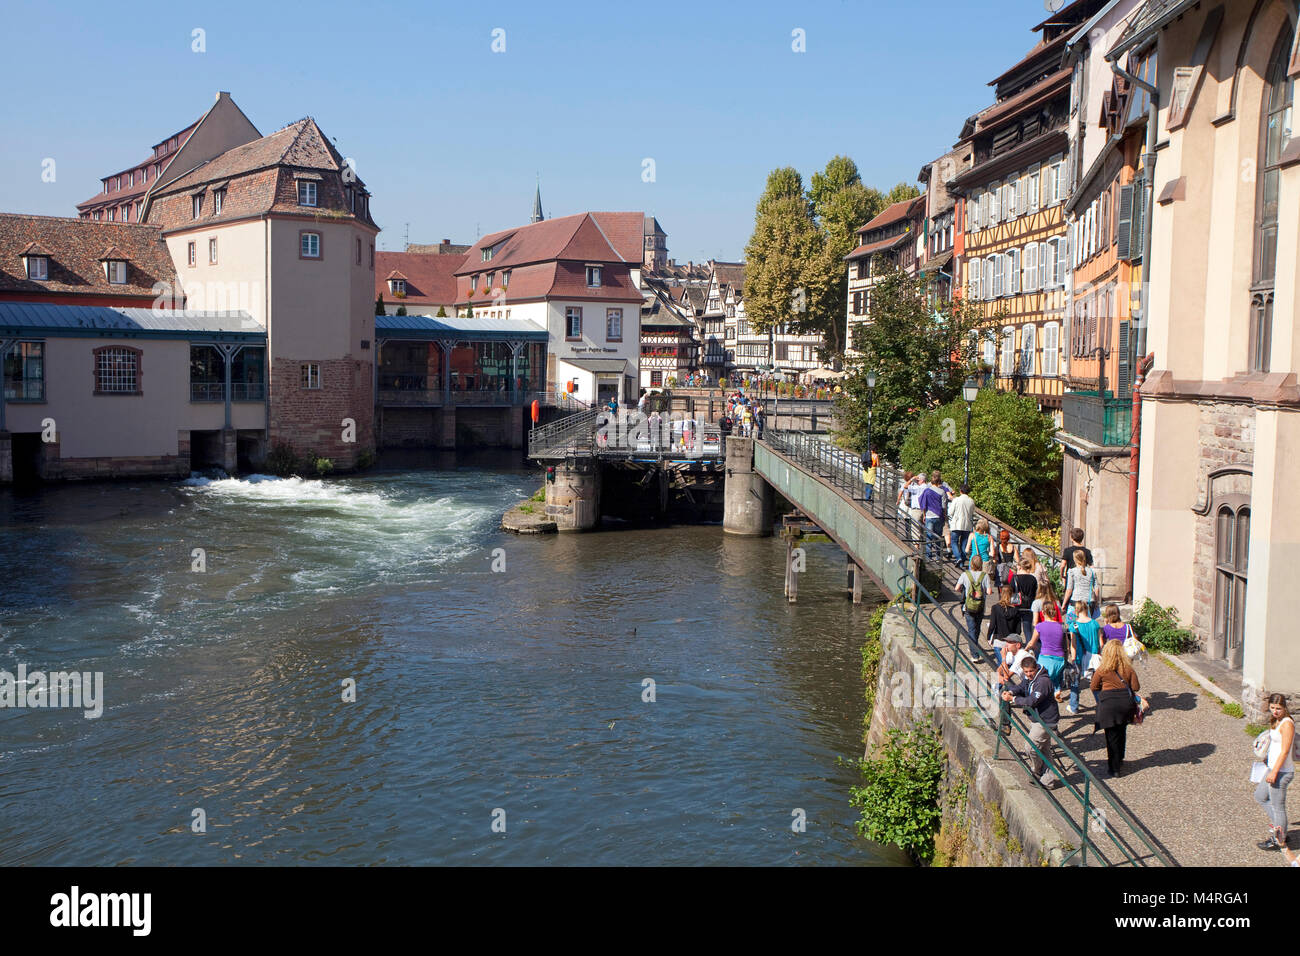 Floodgate at lll river, half-timbered houses, La Petite France (Little France), Strasbourg, Alsace, Bas-Rhin, France, Europe Stock Photo